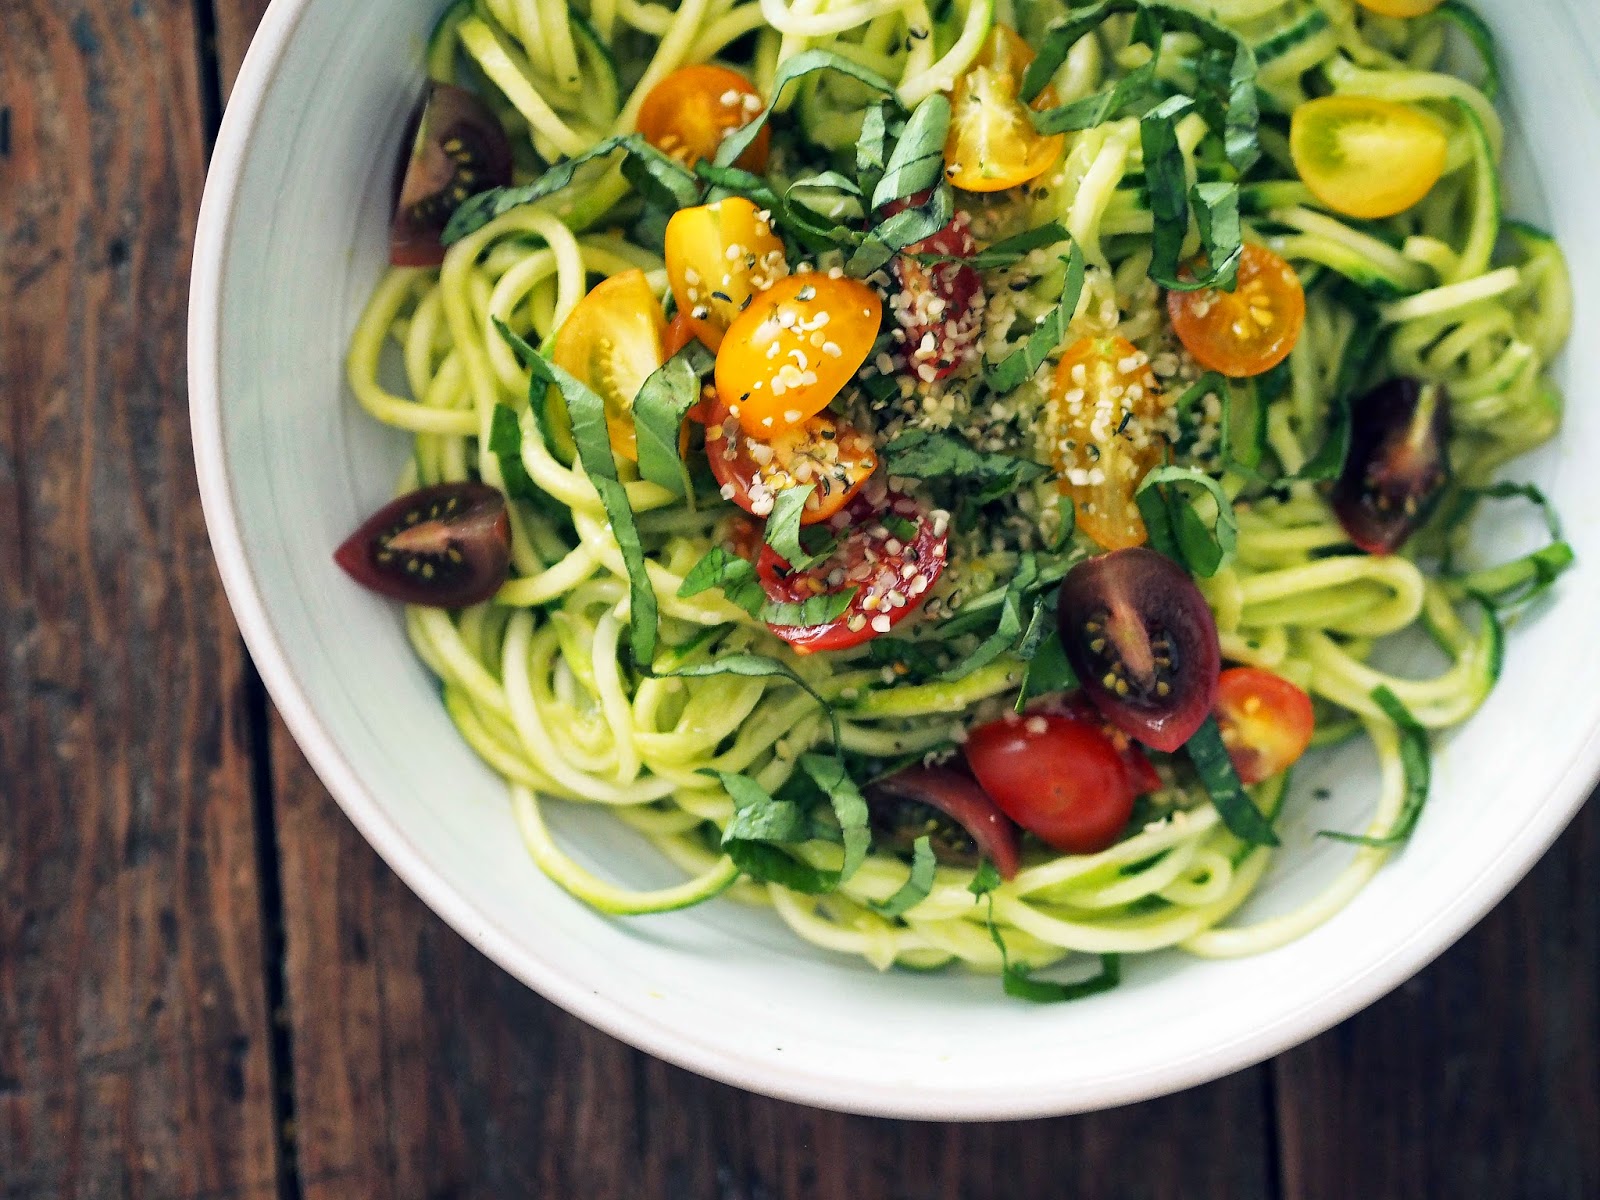 Superfood raw pesto and zucchini noodles | Nicole's Allsorts